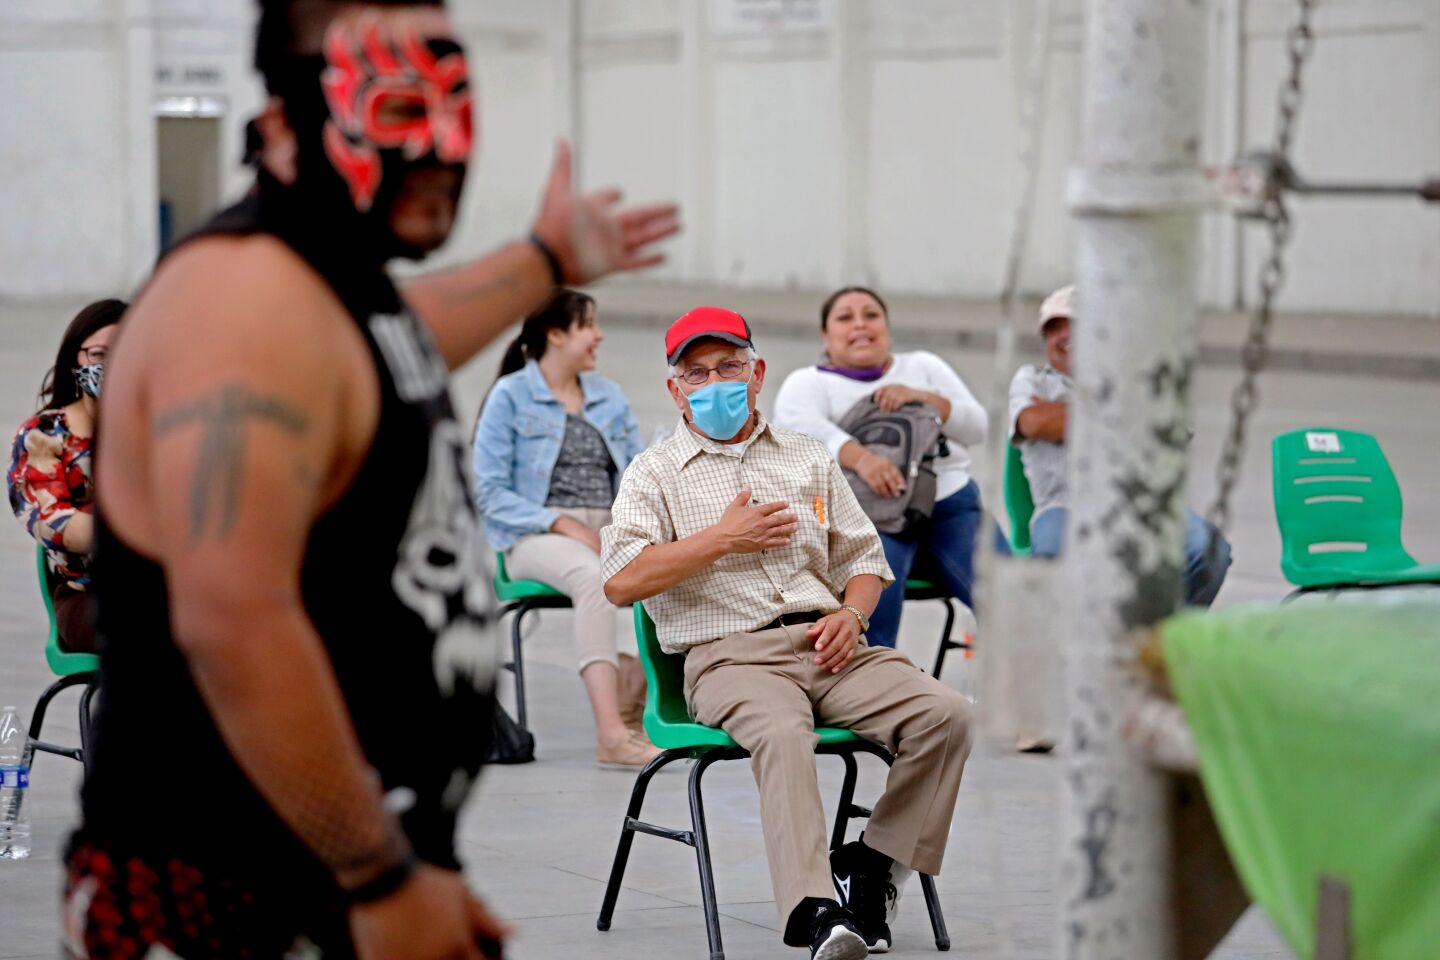 Wrestler Maldad, left, banters with fan Pascual Galindo, center, at a lucha libre event Aug. 23.